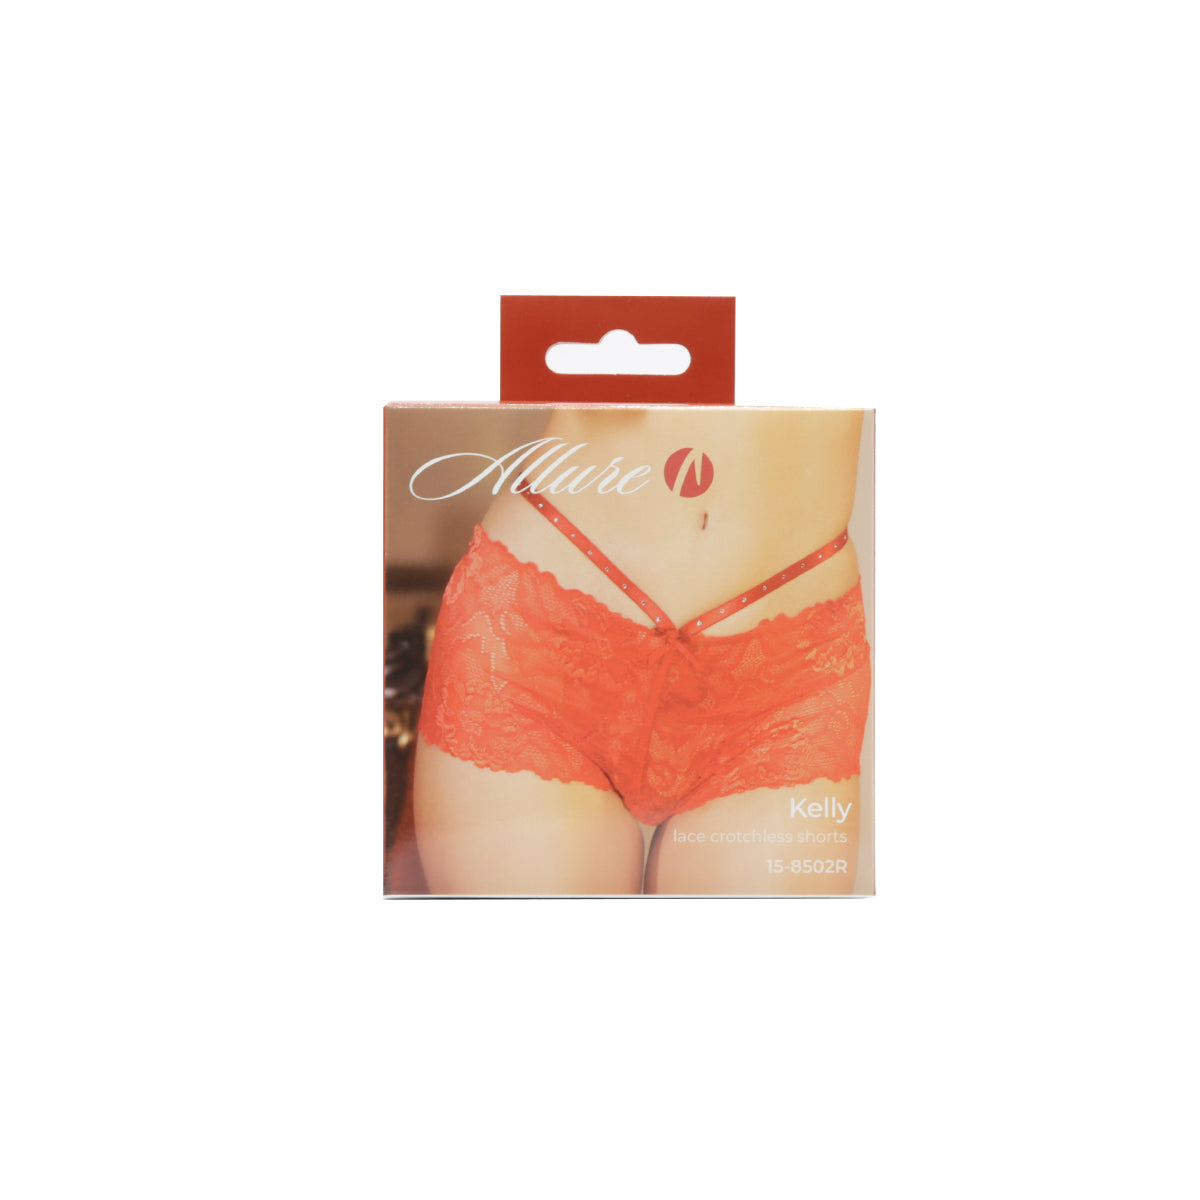 Allure Kelly Lace Crotchless Shorts – Red